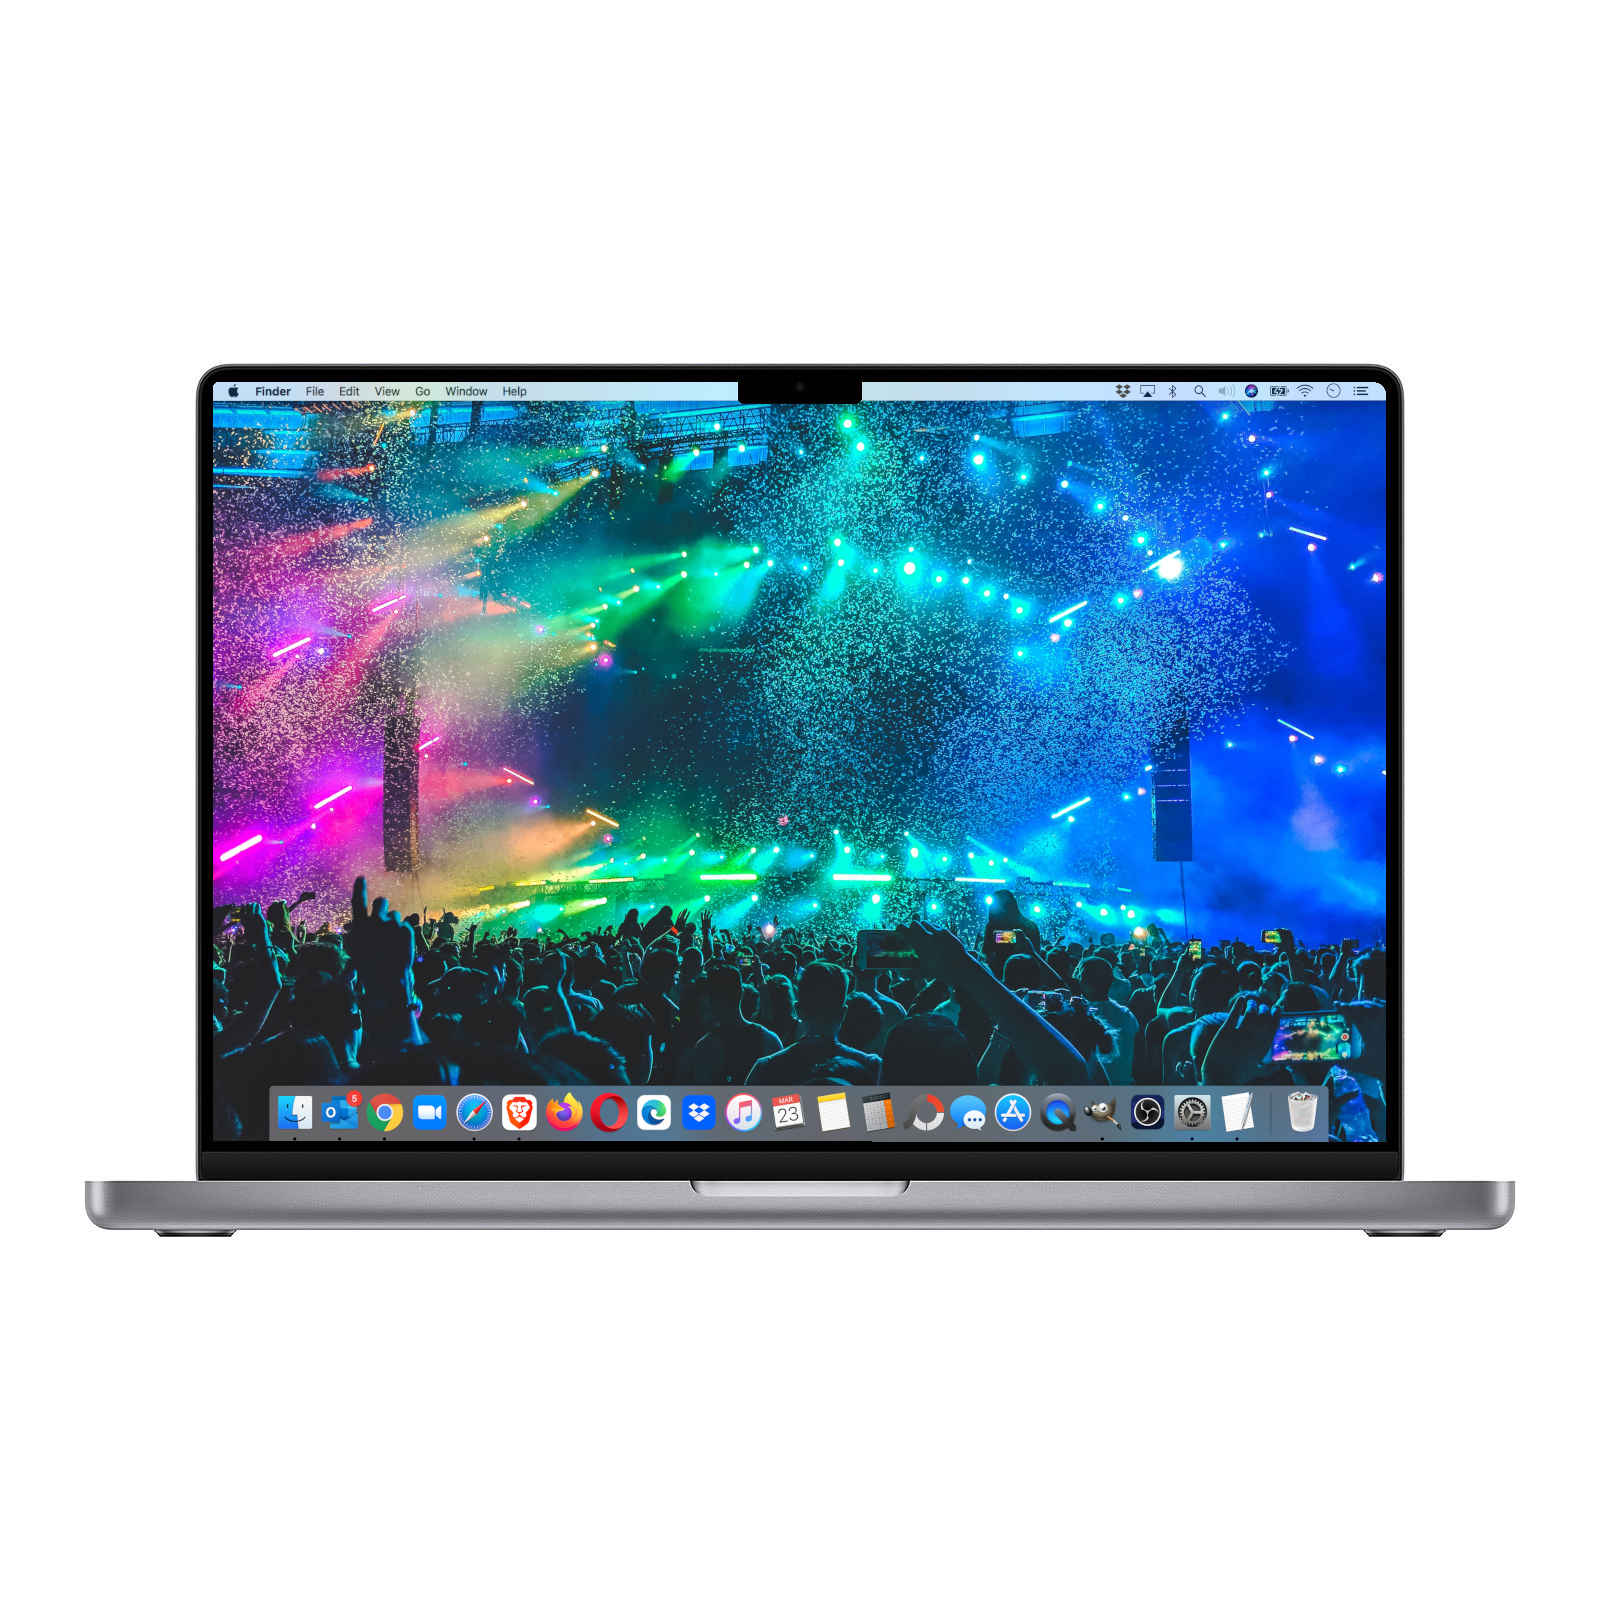 2021 Apple MacBook Pro 16-inch M1 Max - Space Grey (Built to order) |  Techable